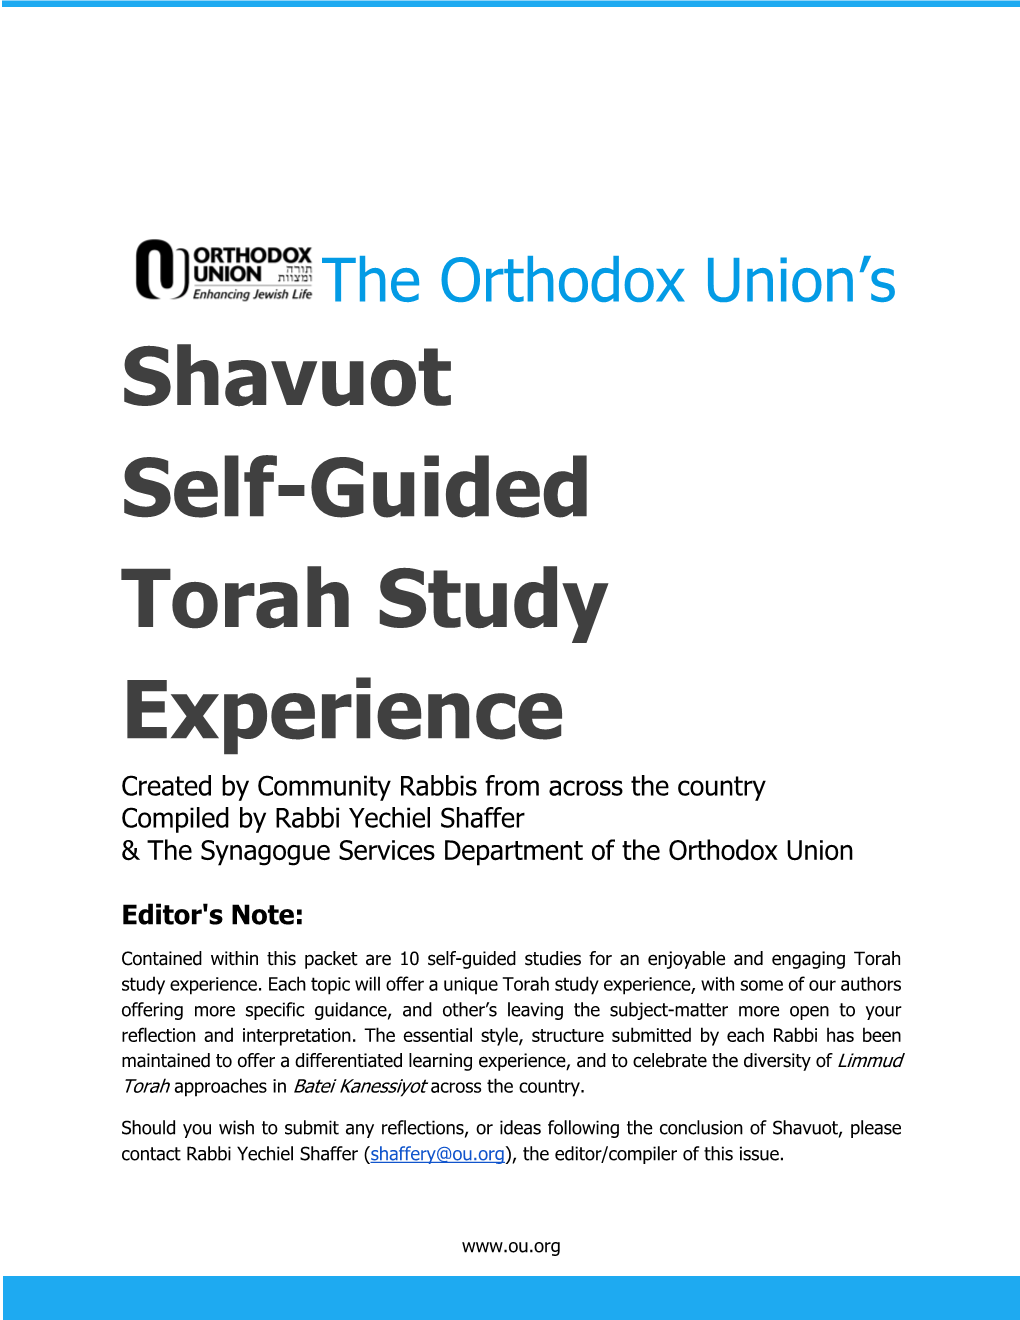 Shavuot Self-Guided Torah Study Experience